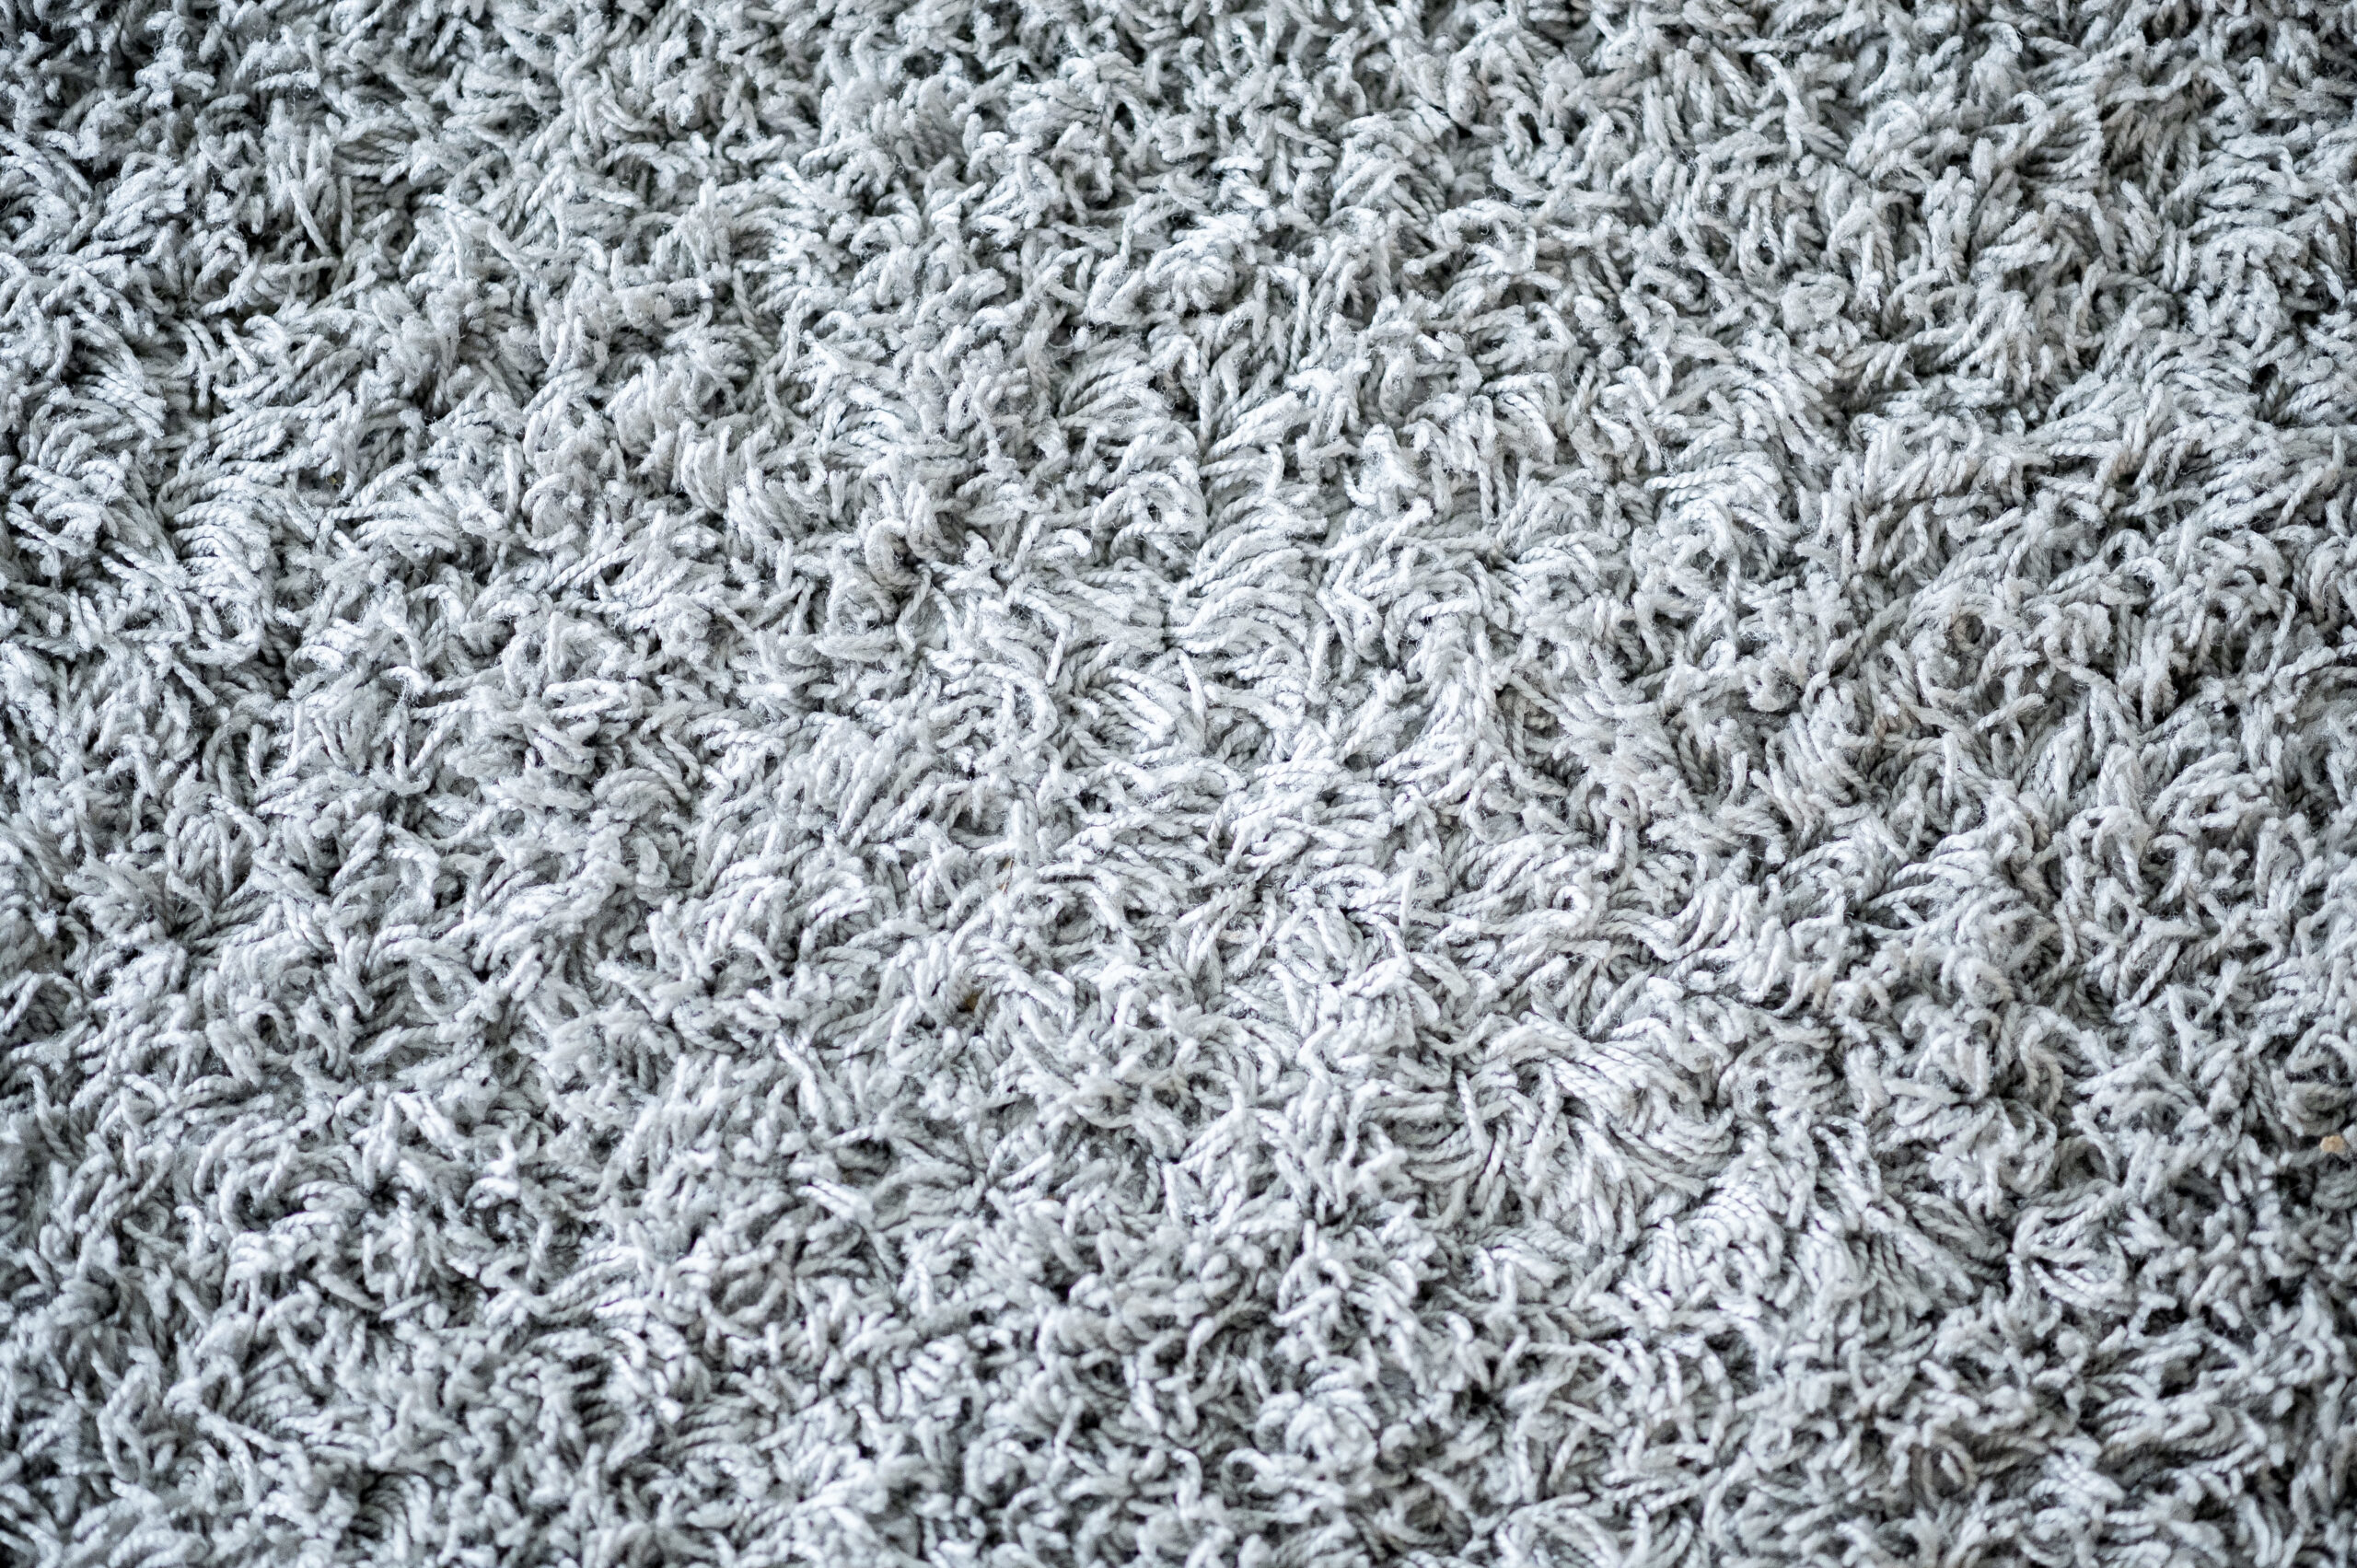 How to Clean My Carpet at Home